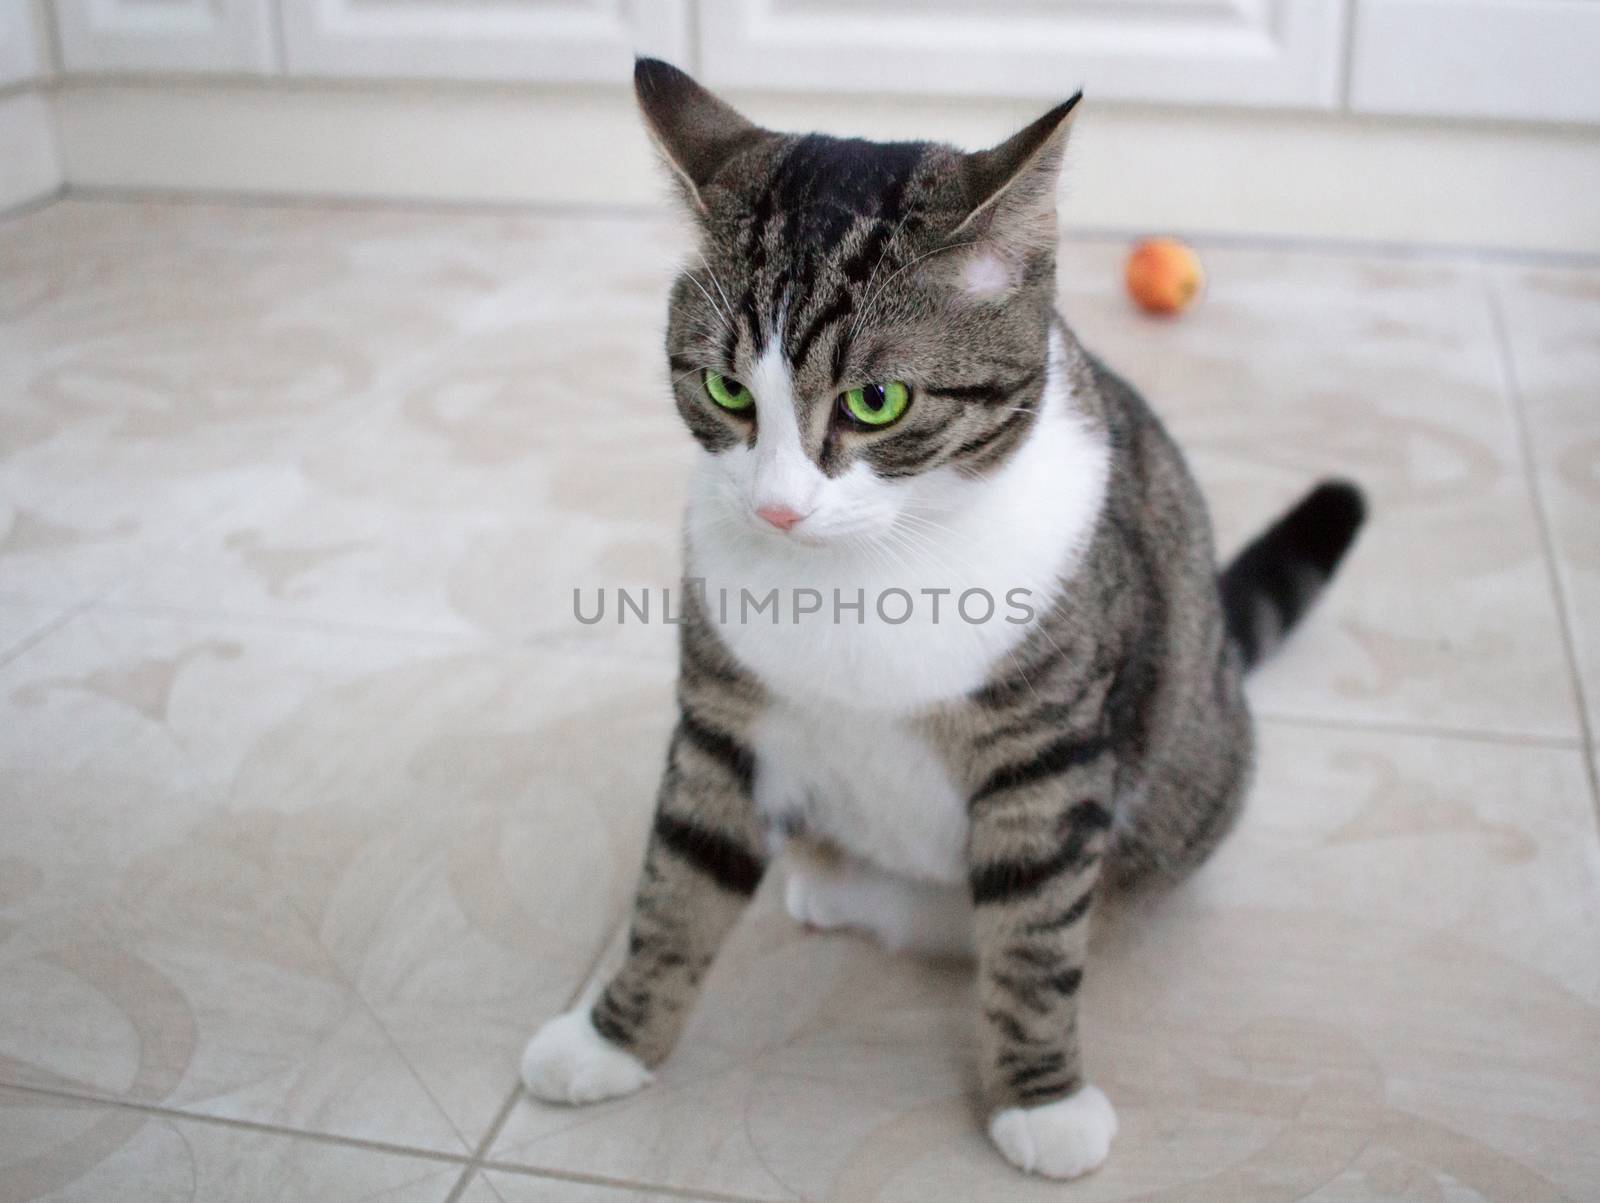 Cat with bright green eyes sits on floor posing  by VeraVerano